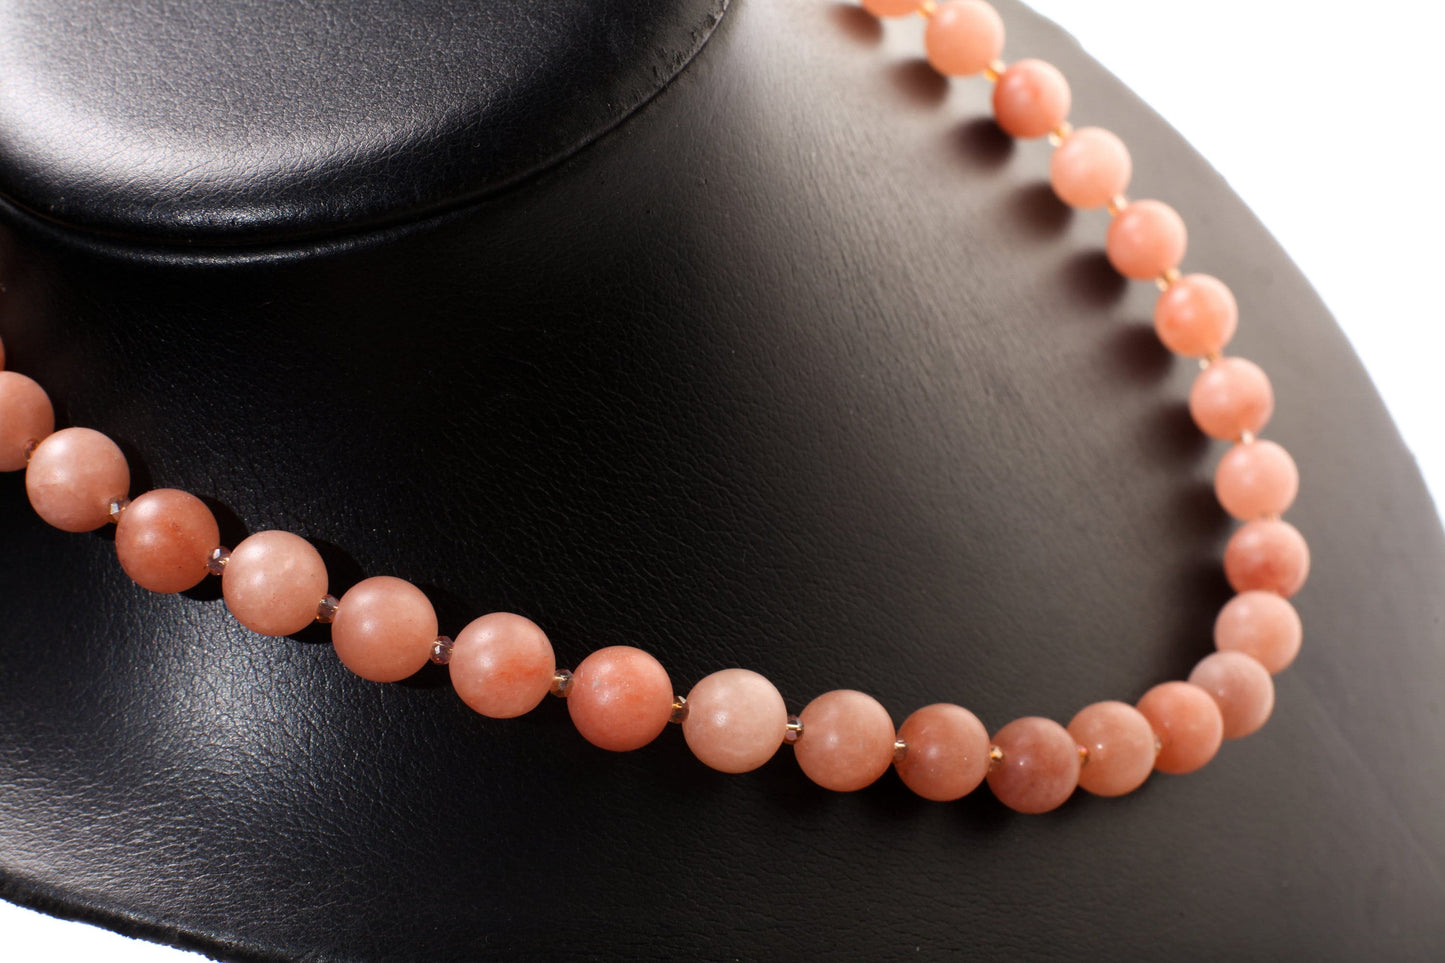 Peach Aventurine Matte 10mm Round Necklace with Salmon Crystal Spacer Beads 18&quot; Gold Necklace